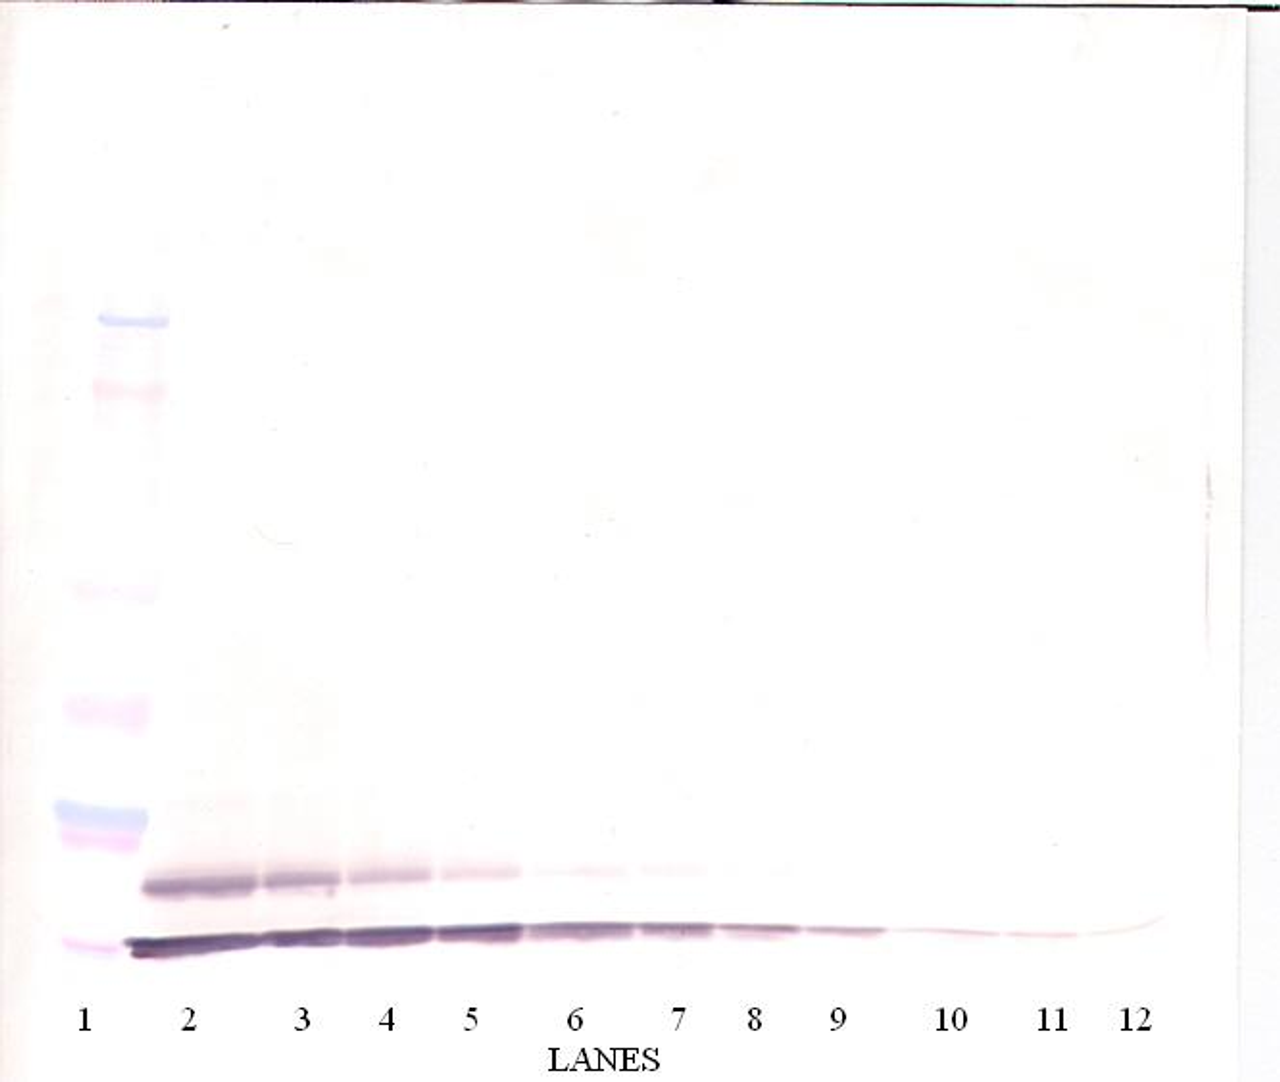 To detect hTARC by Western Blot analysis this antibody can be used at a concentration of 0.1 - 0.2 ug/ml. Used in conjunction with compatible secondary reagents the detection limit for recombinant hTARC is 1.5 - 3.0 ng/lane, under either reducing or non-reducing conditions.